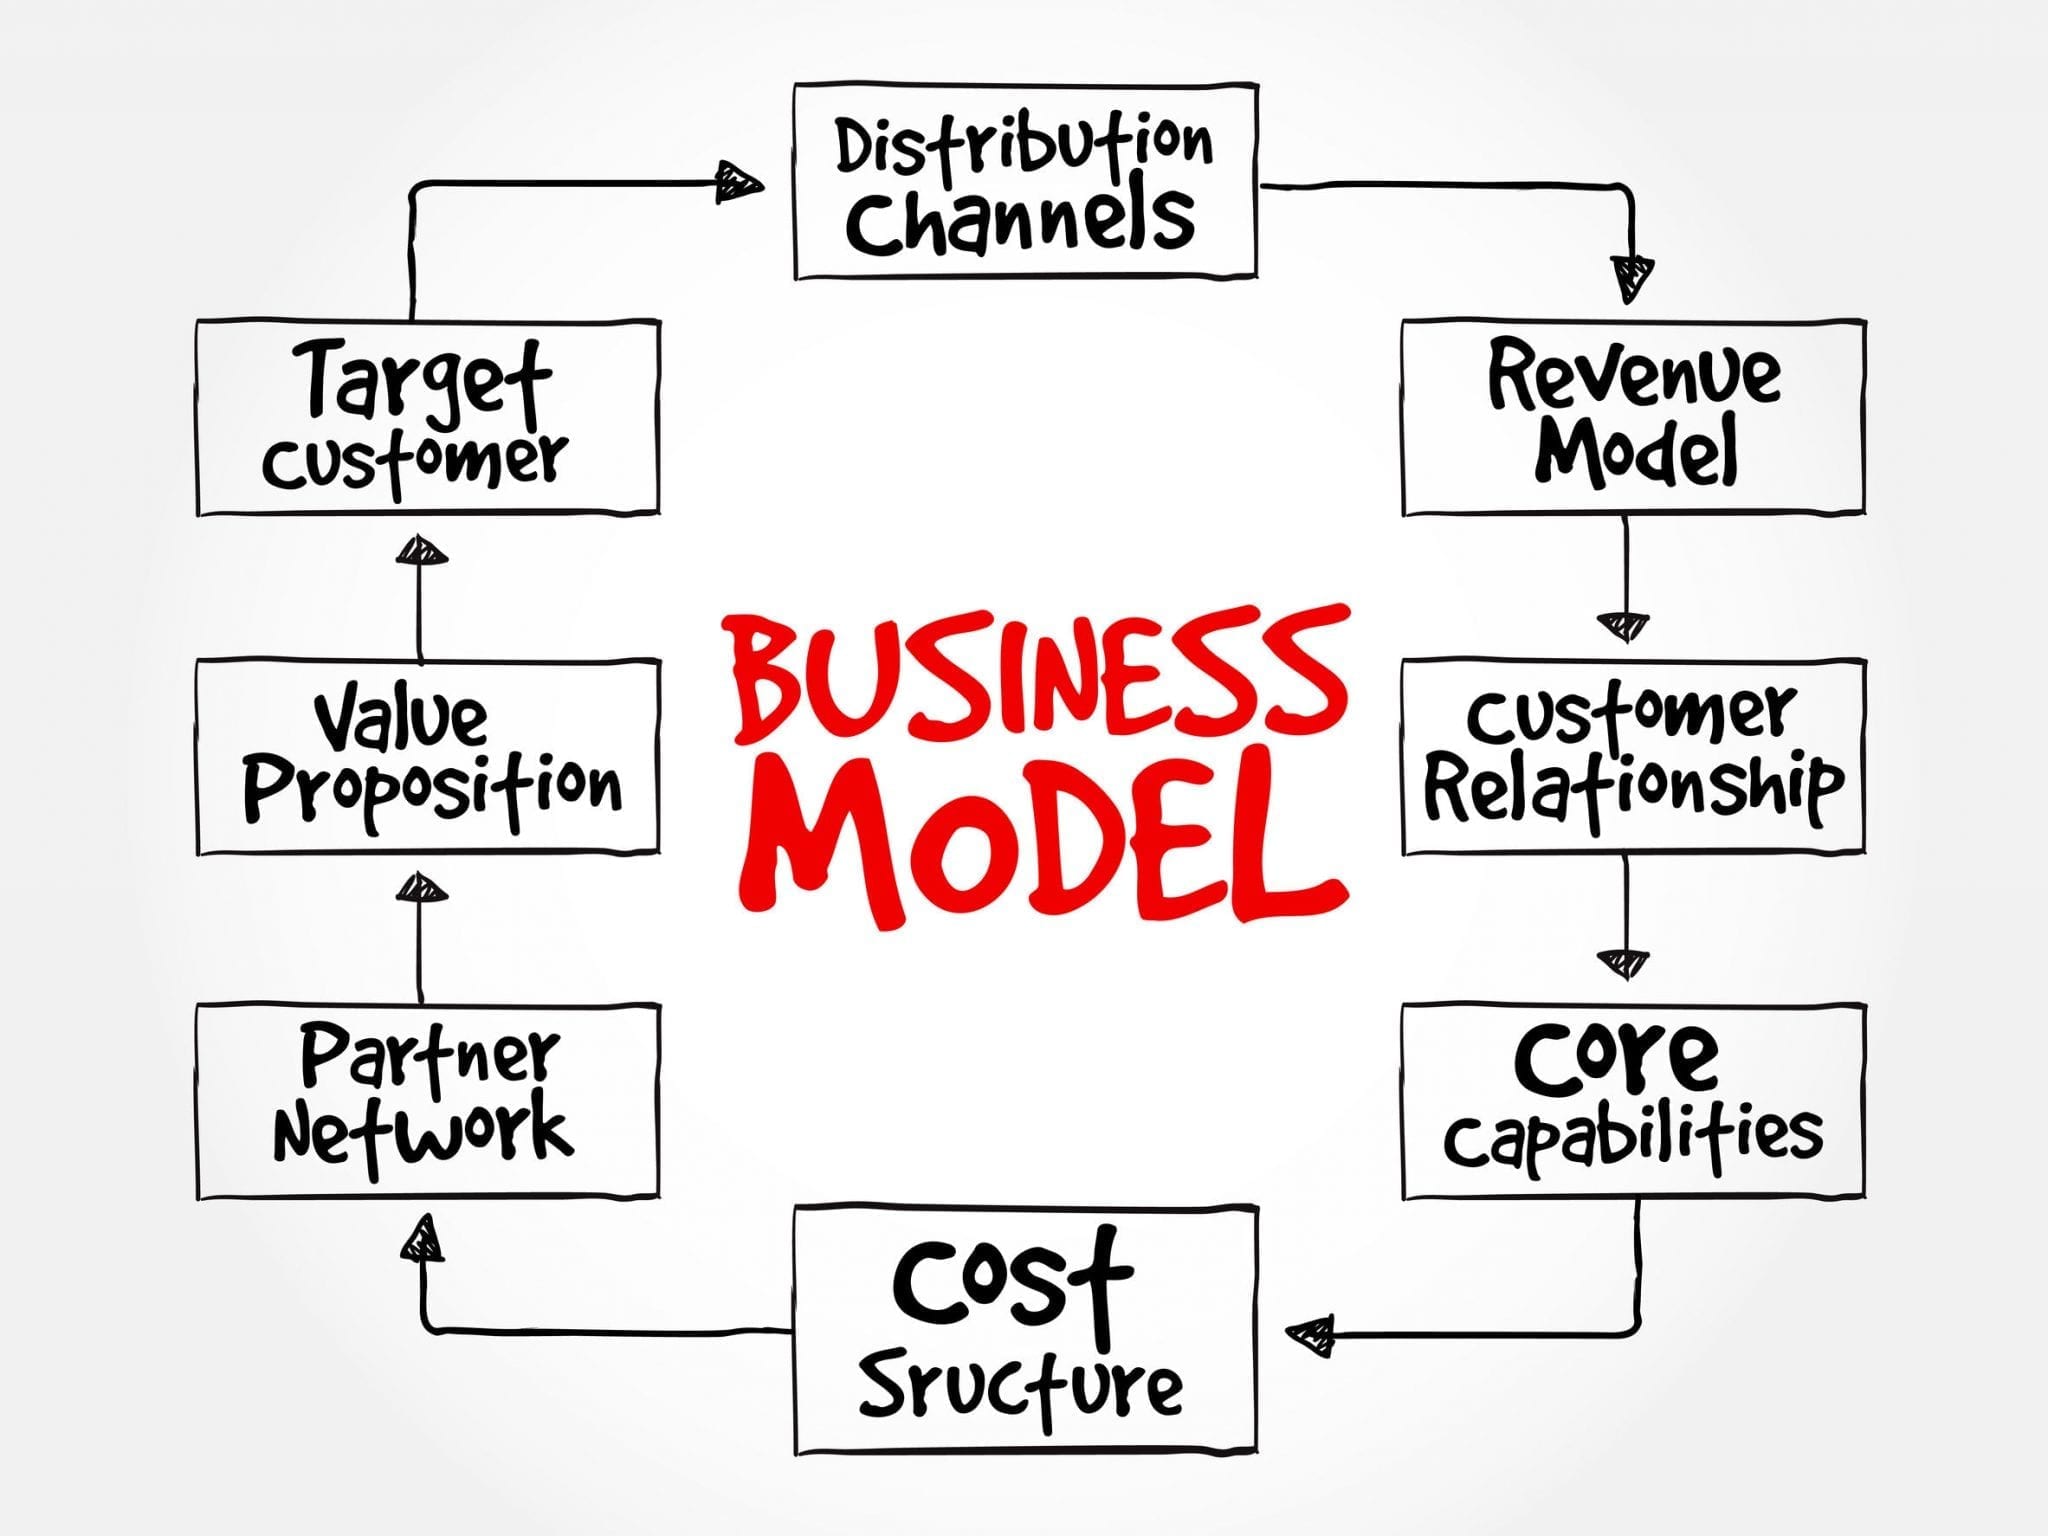 most important element of a business model & responsible for making the model work